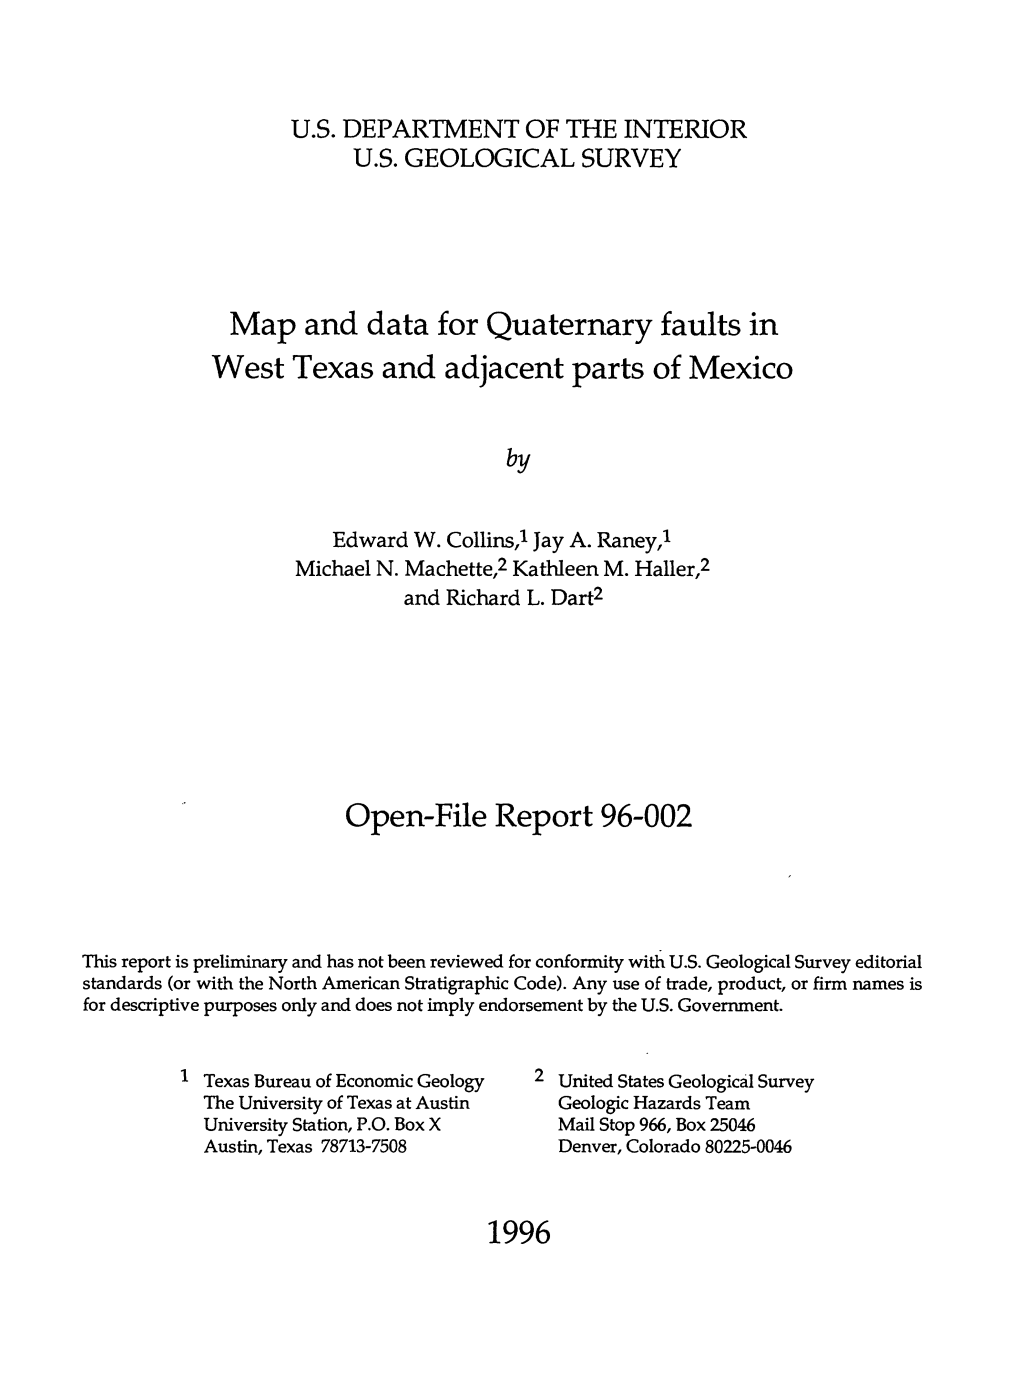 Map and Data for Quaternary Faults in West Texas and Adjacent Parts of Mexico